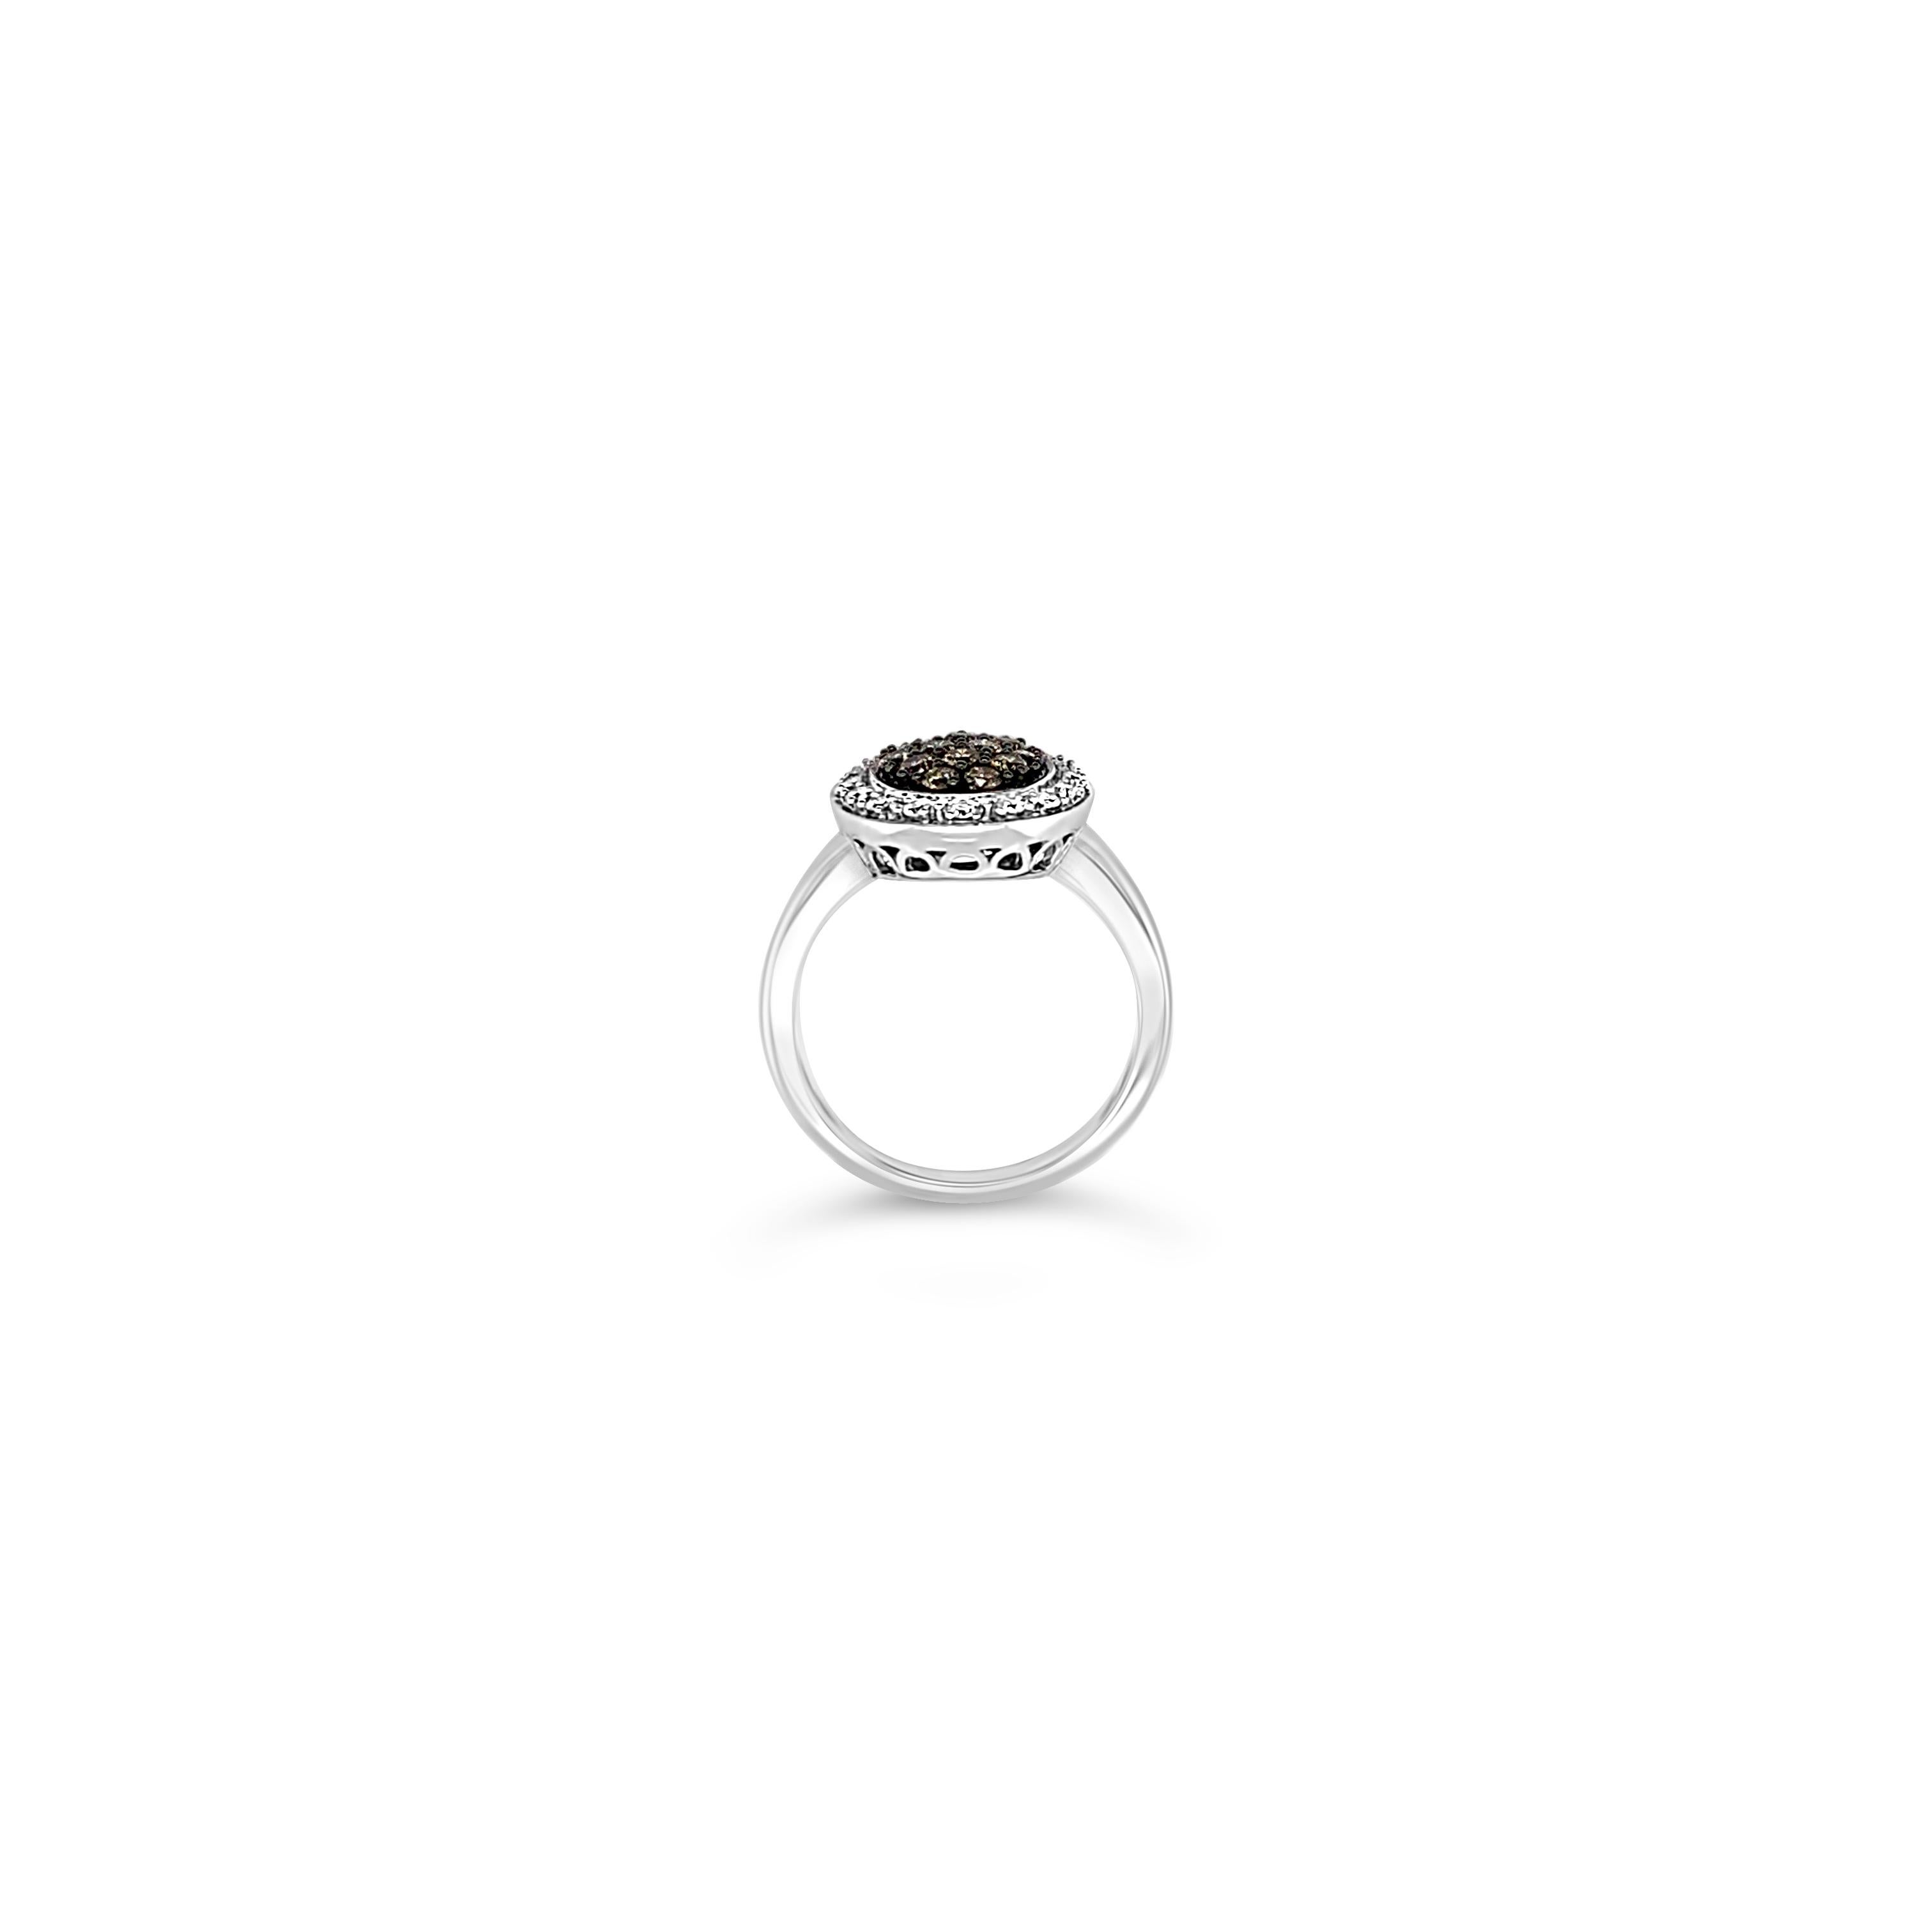 Le Vian® Ring featuring .35 cts. Chocolate Diamonds®, .11 cts. Vanilla Diamonds® set in 14K Vanilla Gold®

Diamonds Breakdown:
.35 cts Brown Diamonds
.11 cts White Diamonds

Gems Breakdown:
None

Ring may or may not be sizable, please feel free to